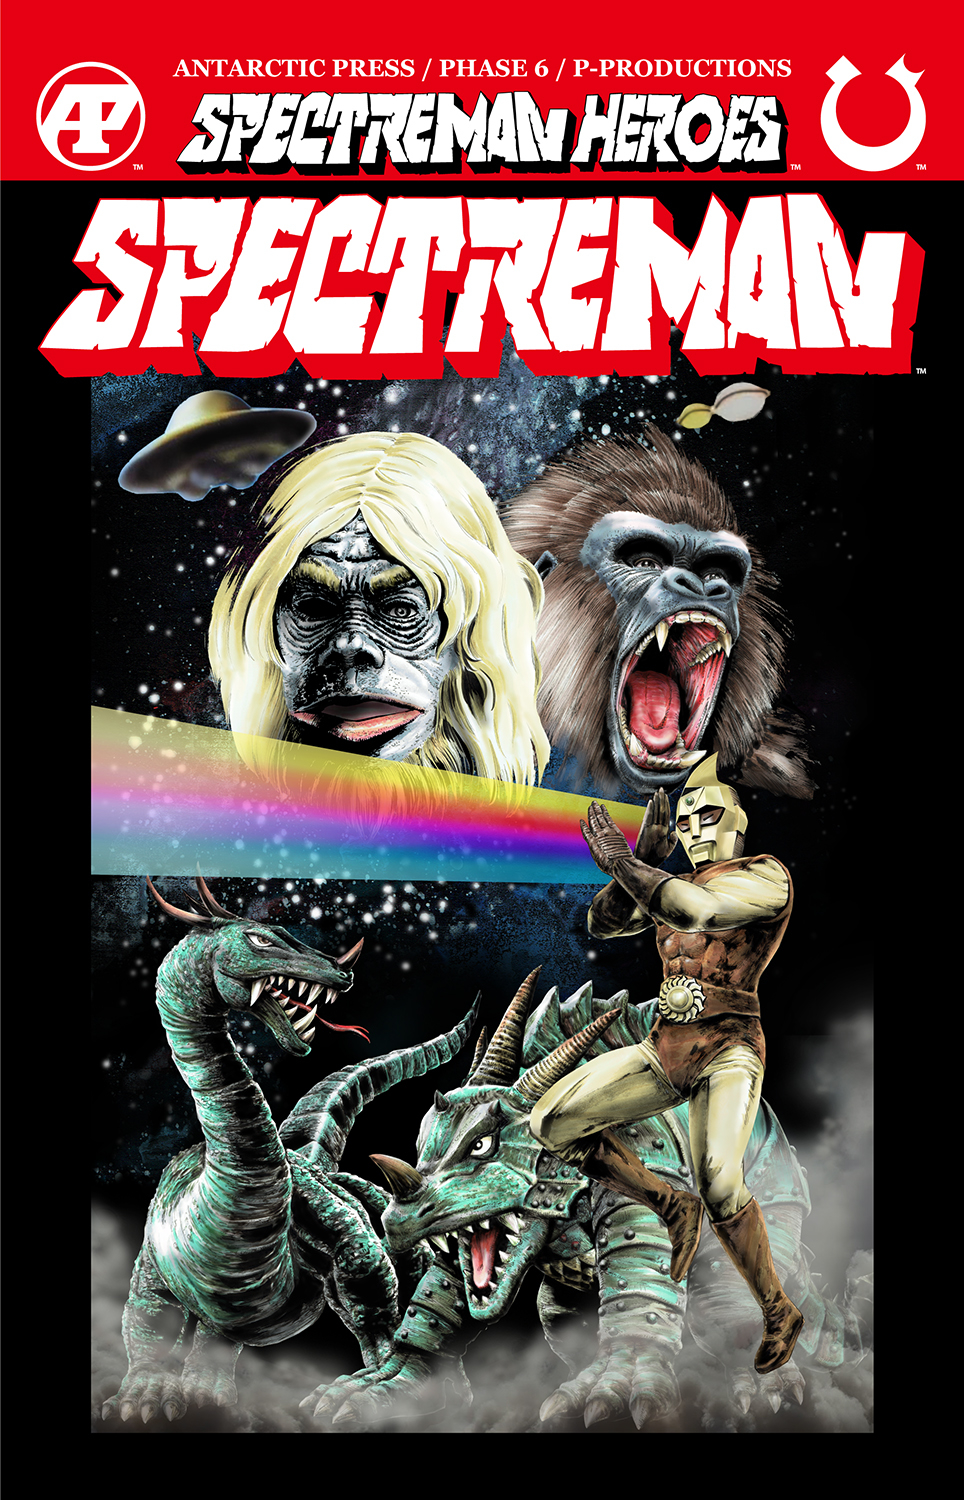 Spectreman Heroes #5 Cover A Spectreman (Of 5)